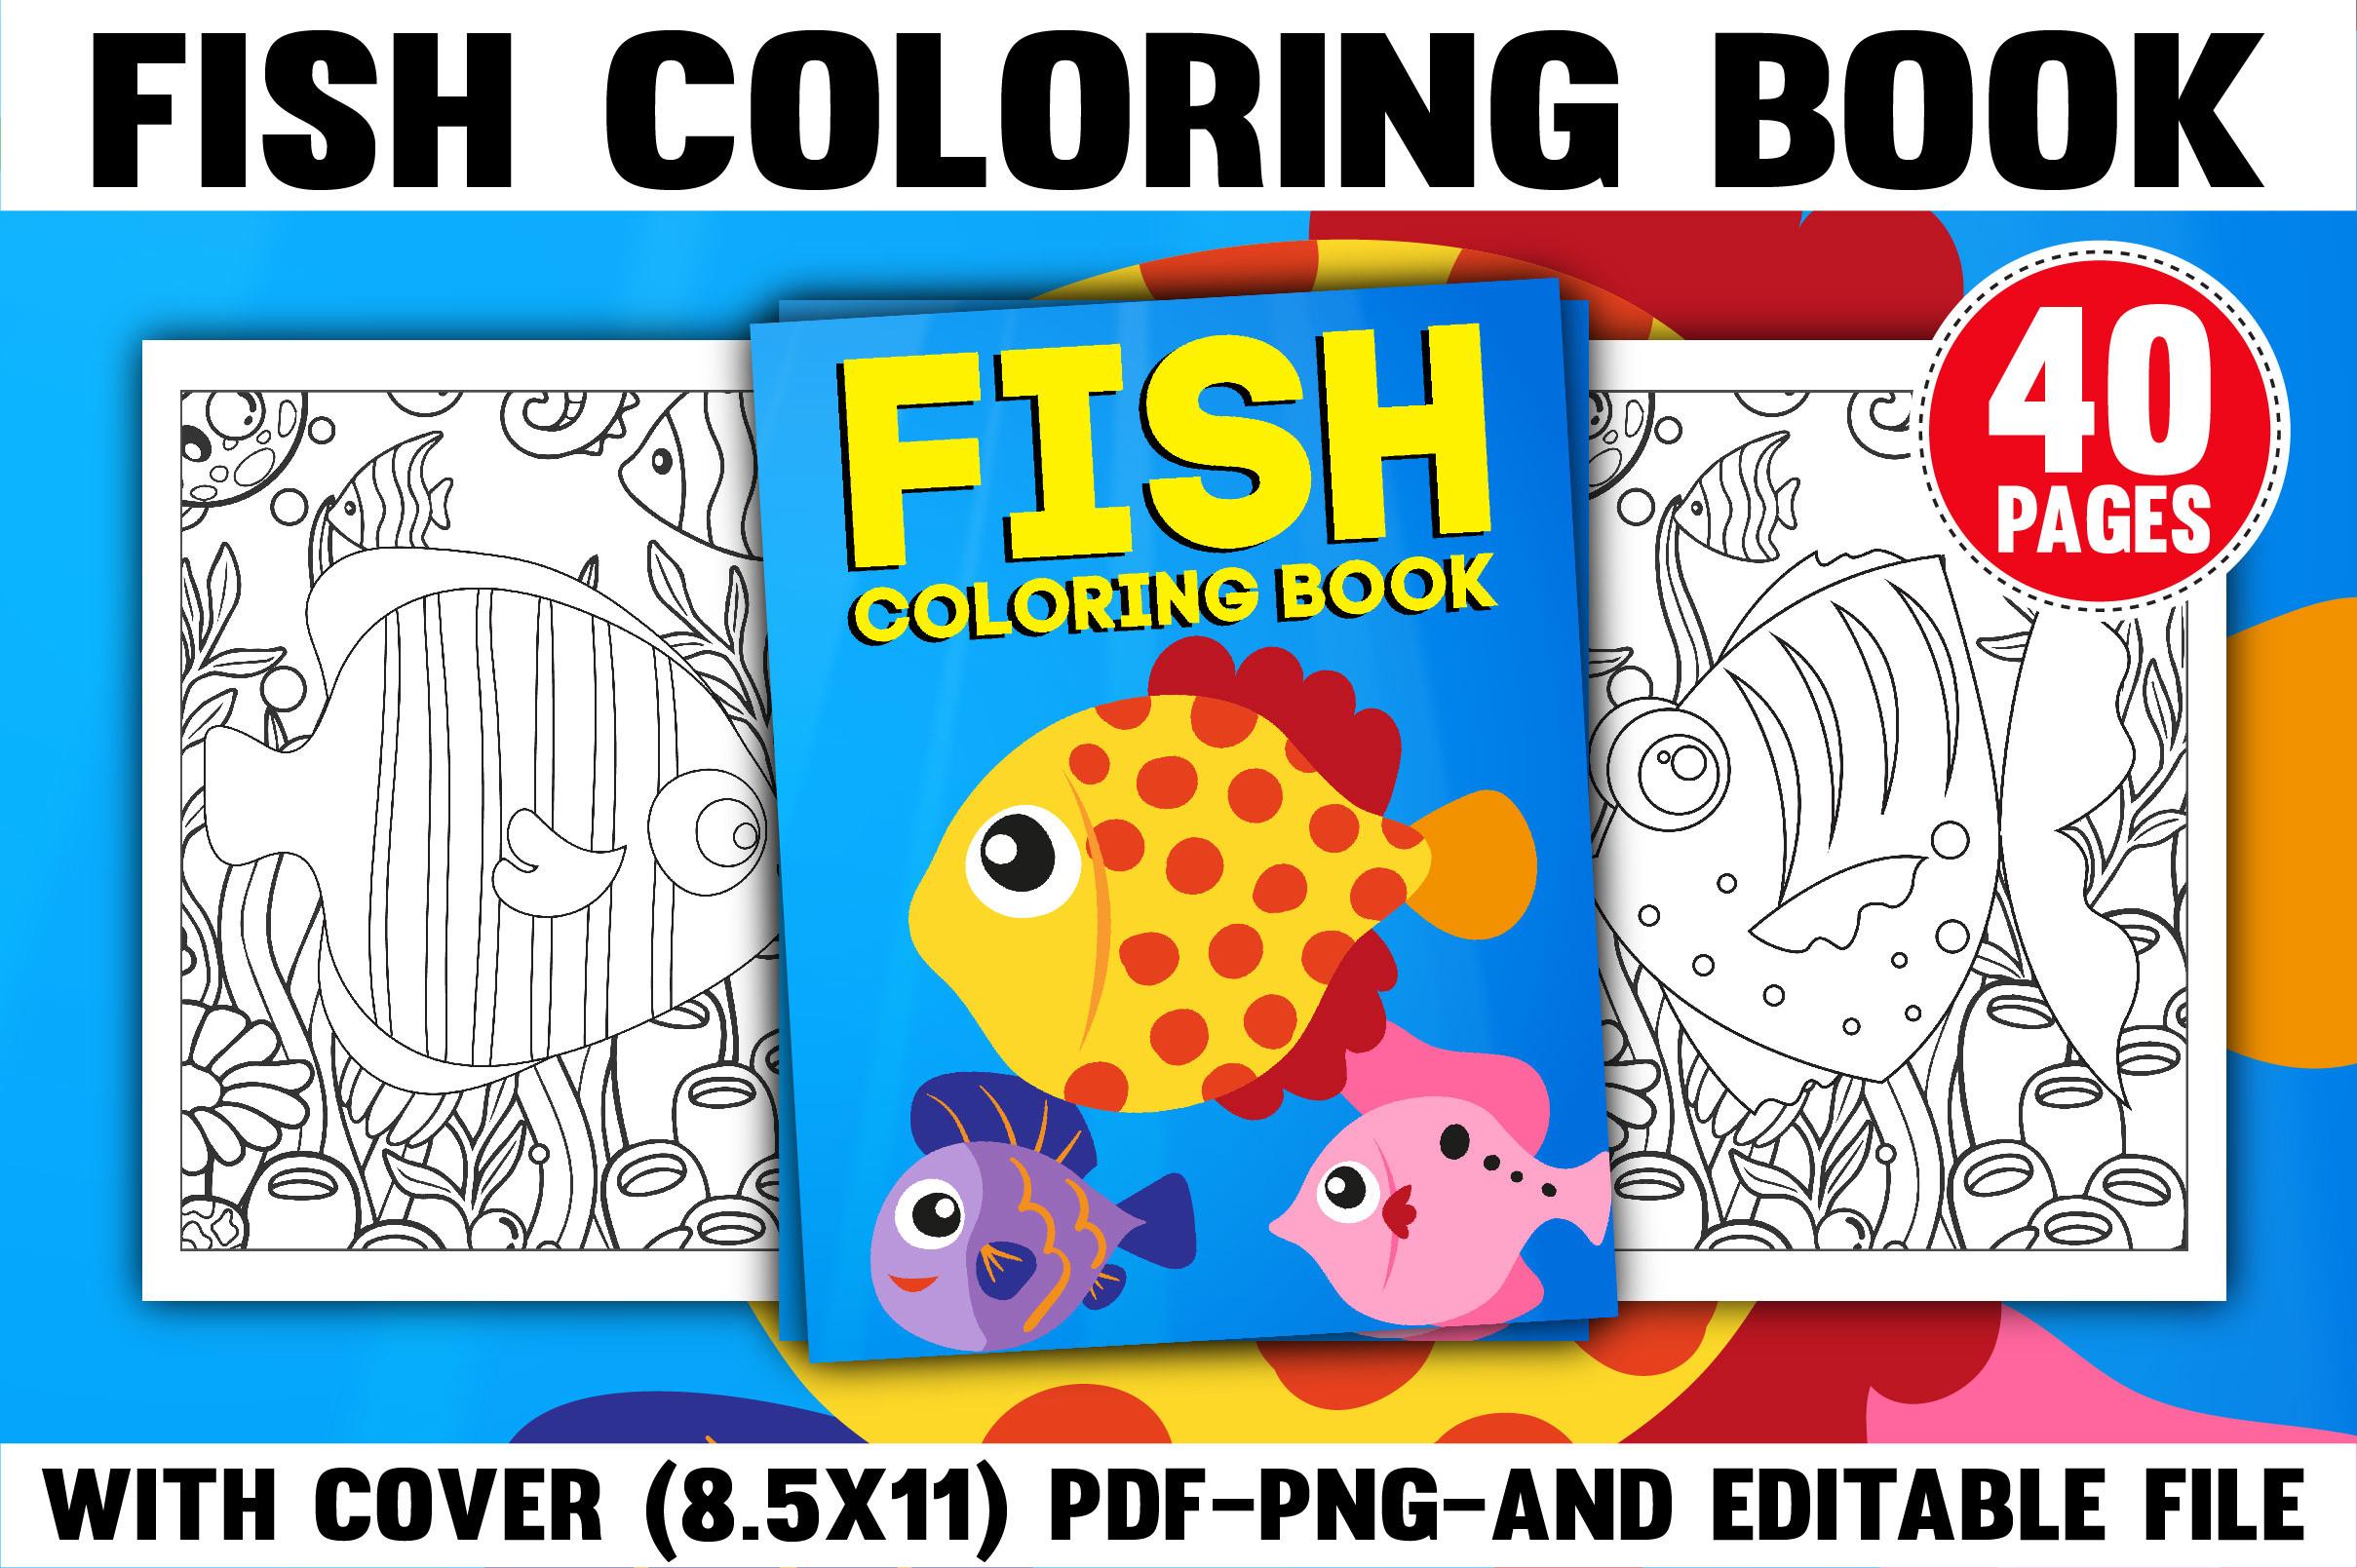 Fish Coloring Book with Cover Design